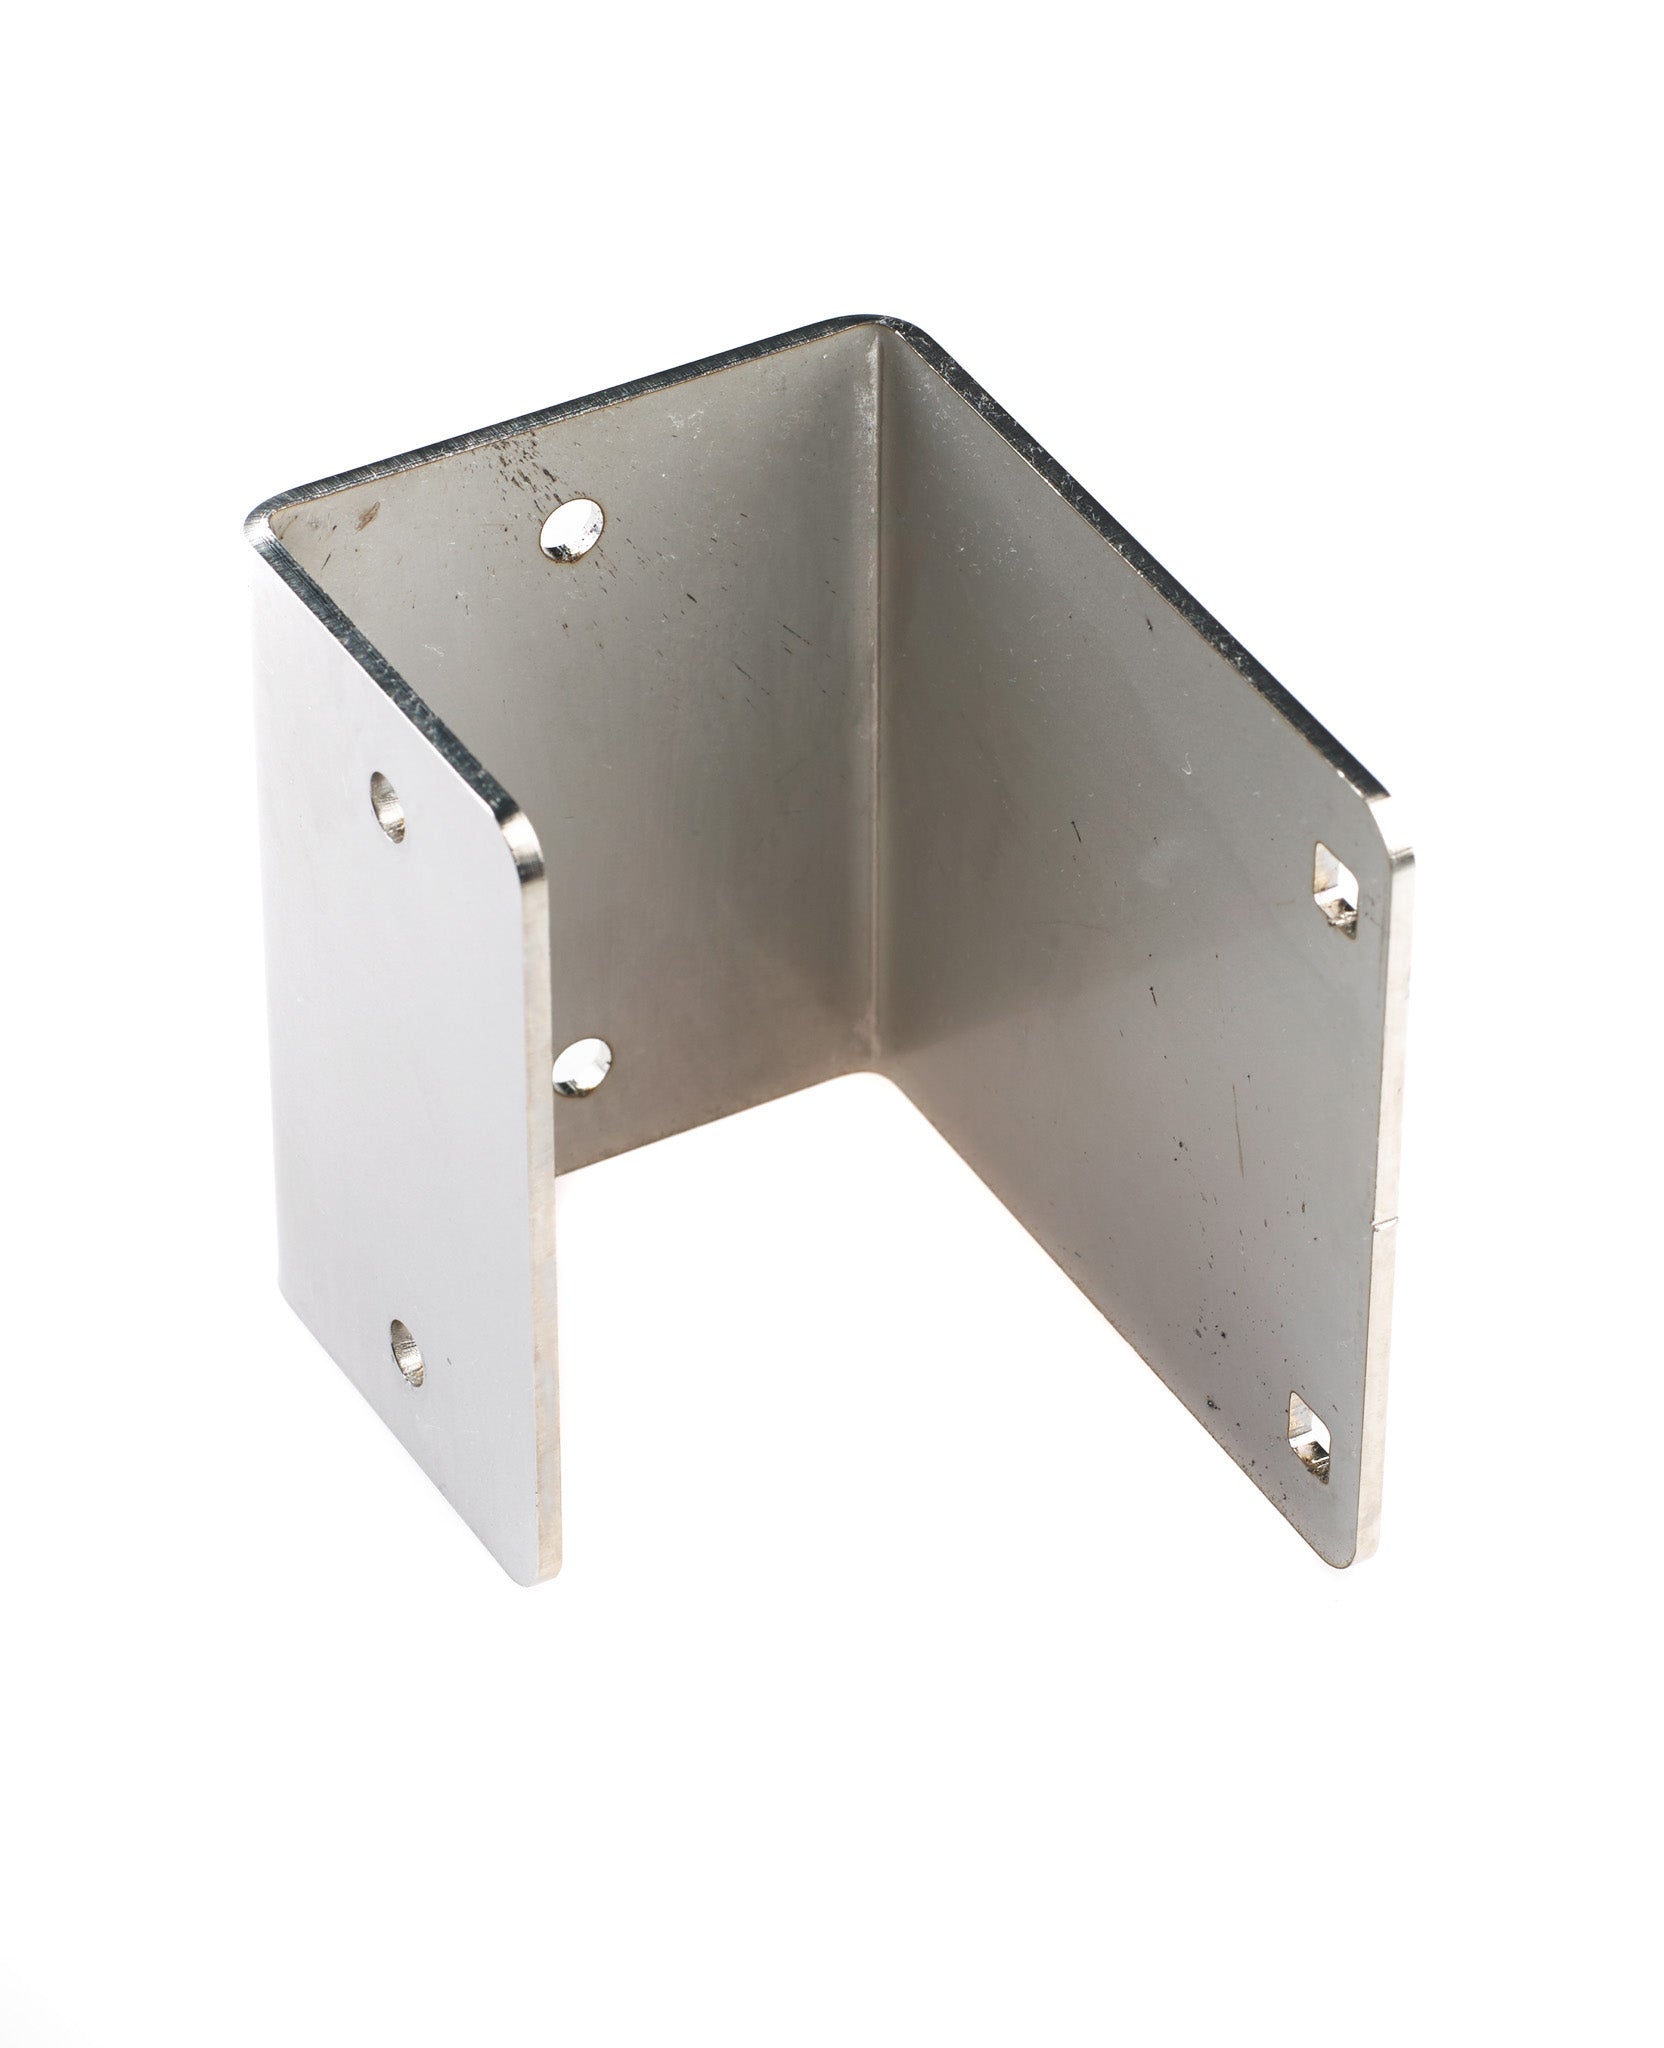 Over the door strengthened bracket for Supra J5 and S5 key safes